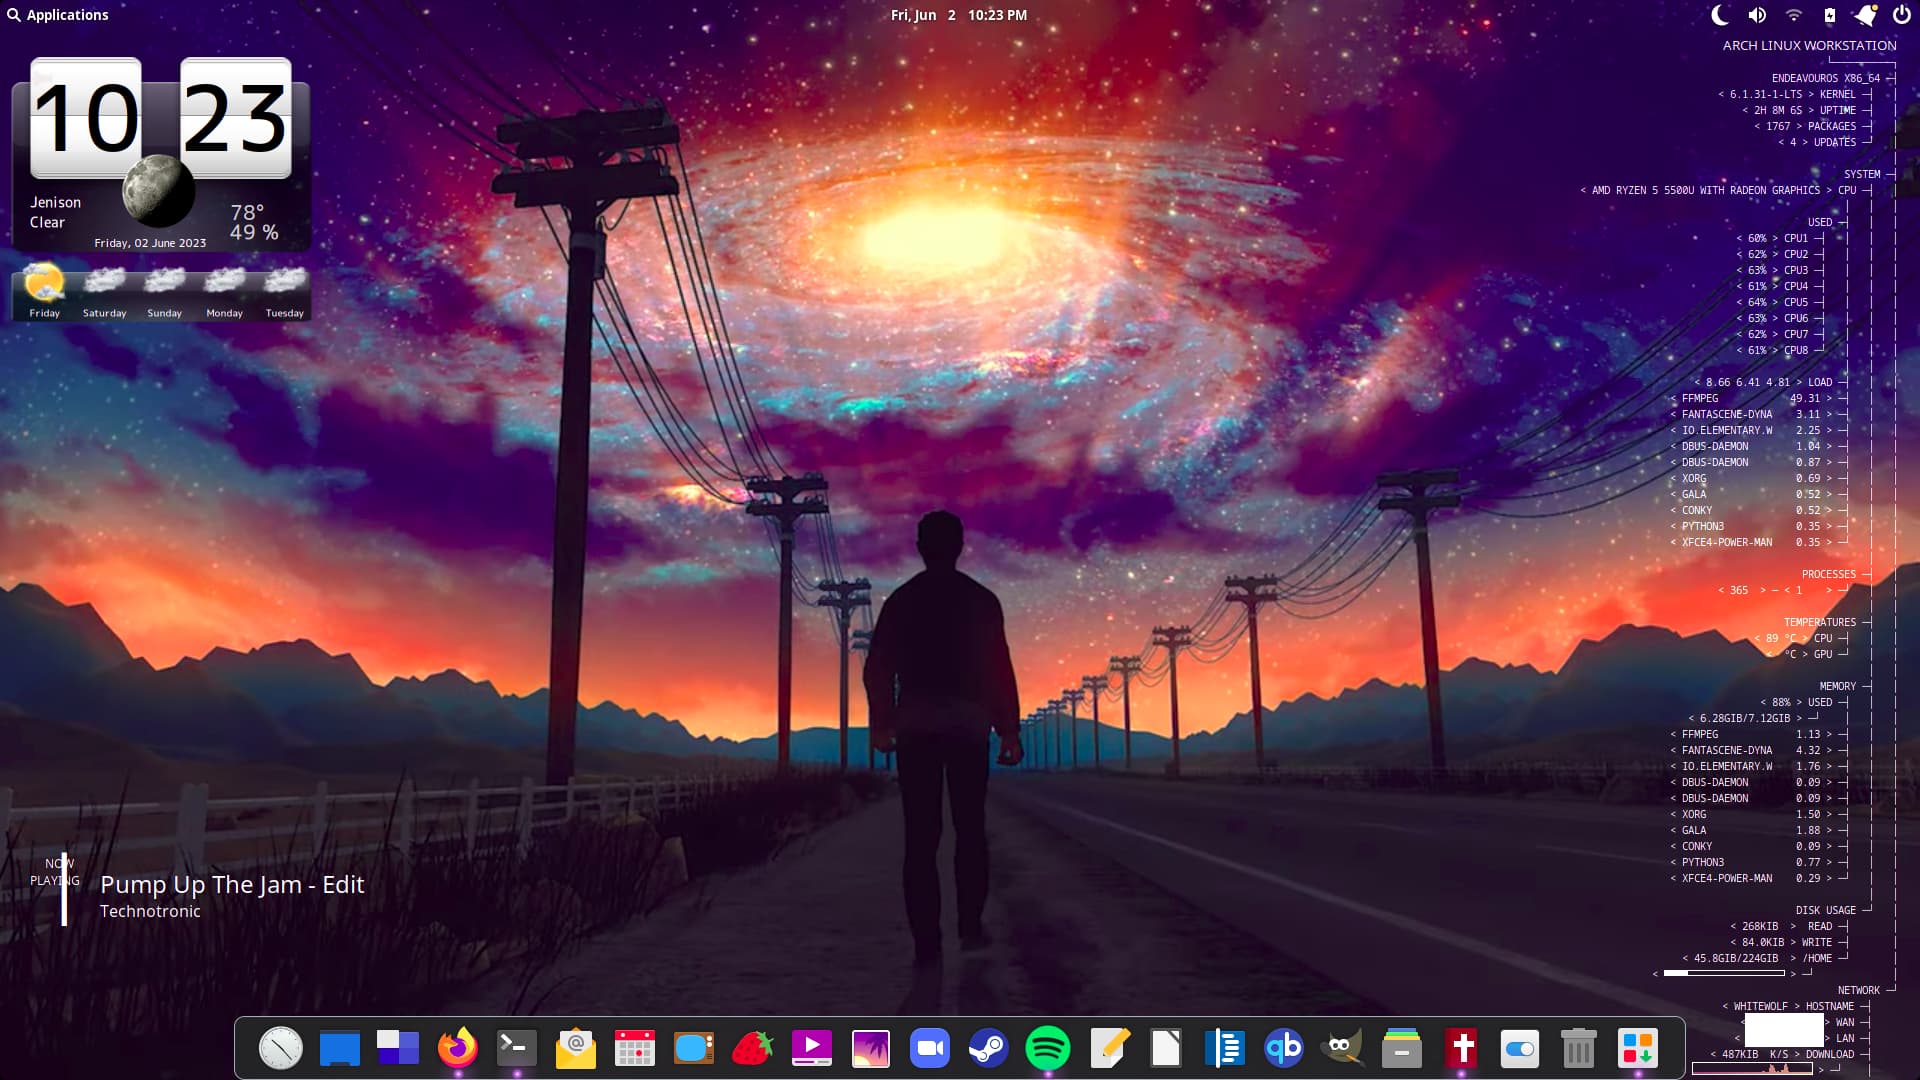 gif DesktopHut - Live Wallpapers and Animated Wallpapers 4K/HD